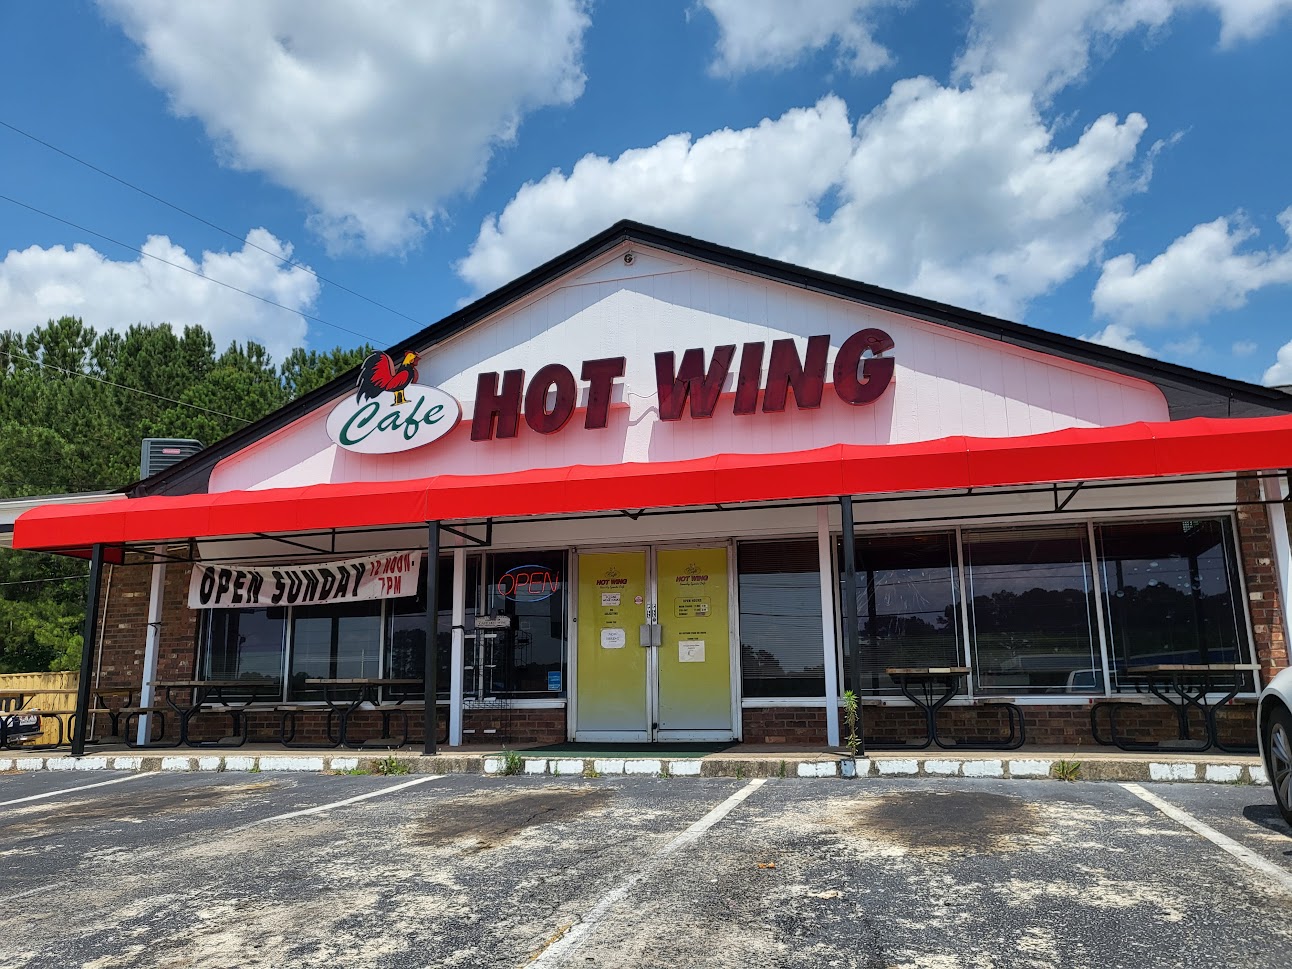 Cafe Hot Wing